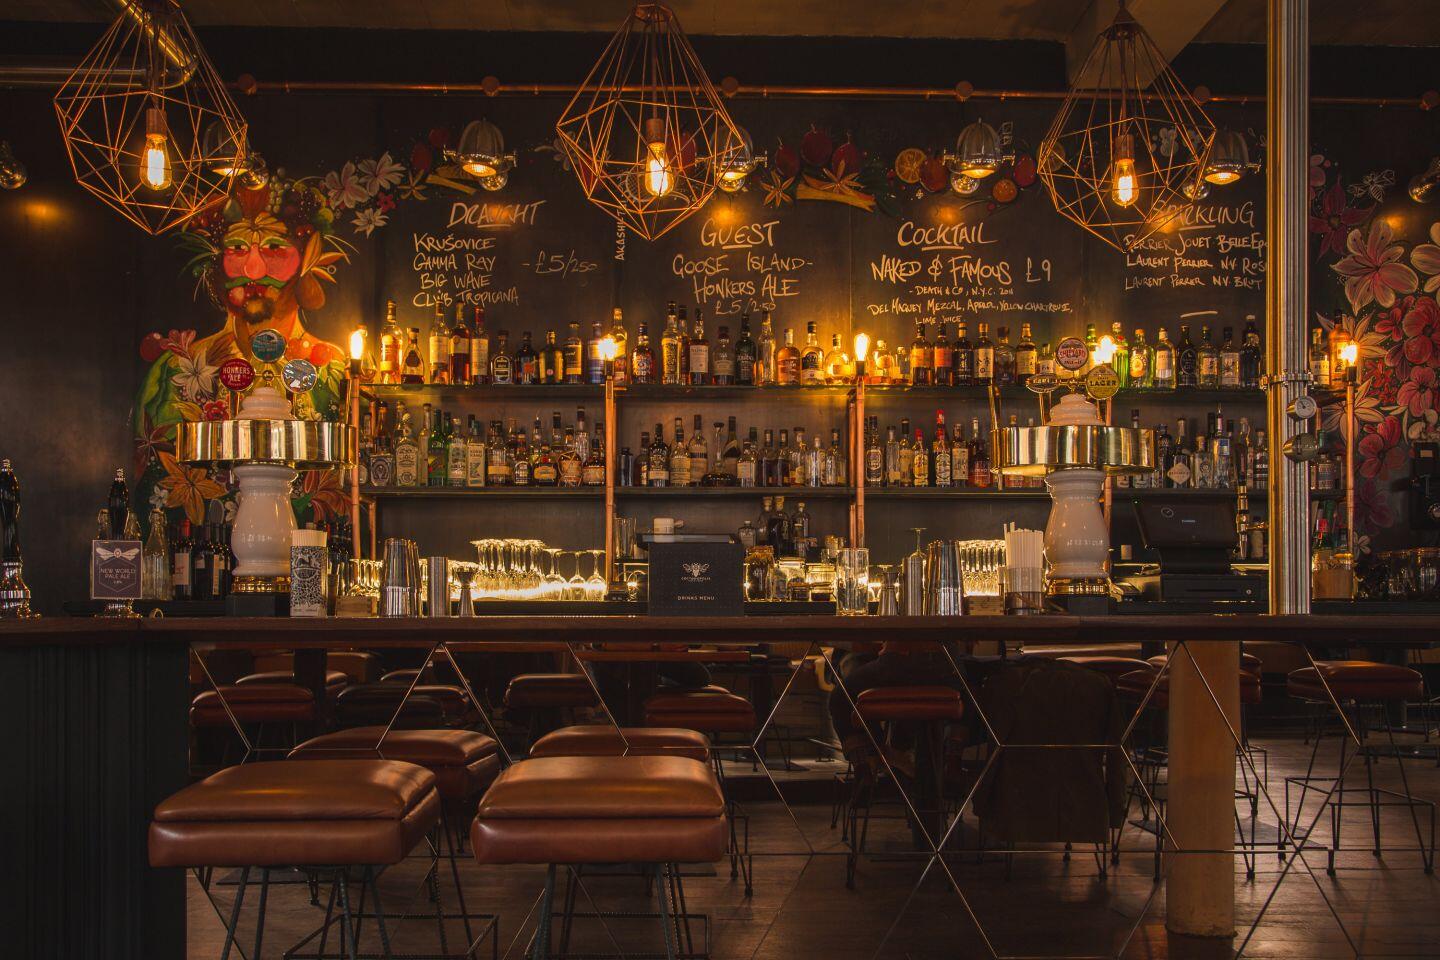 An image of Cottonopolis, one of the best bars in Manchester